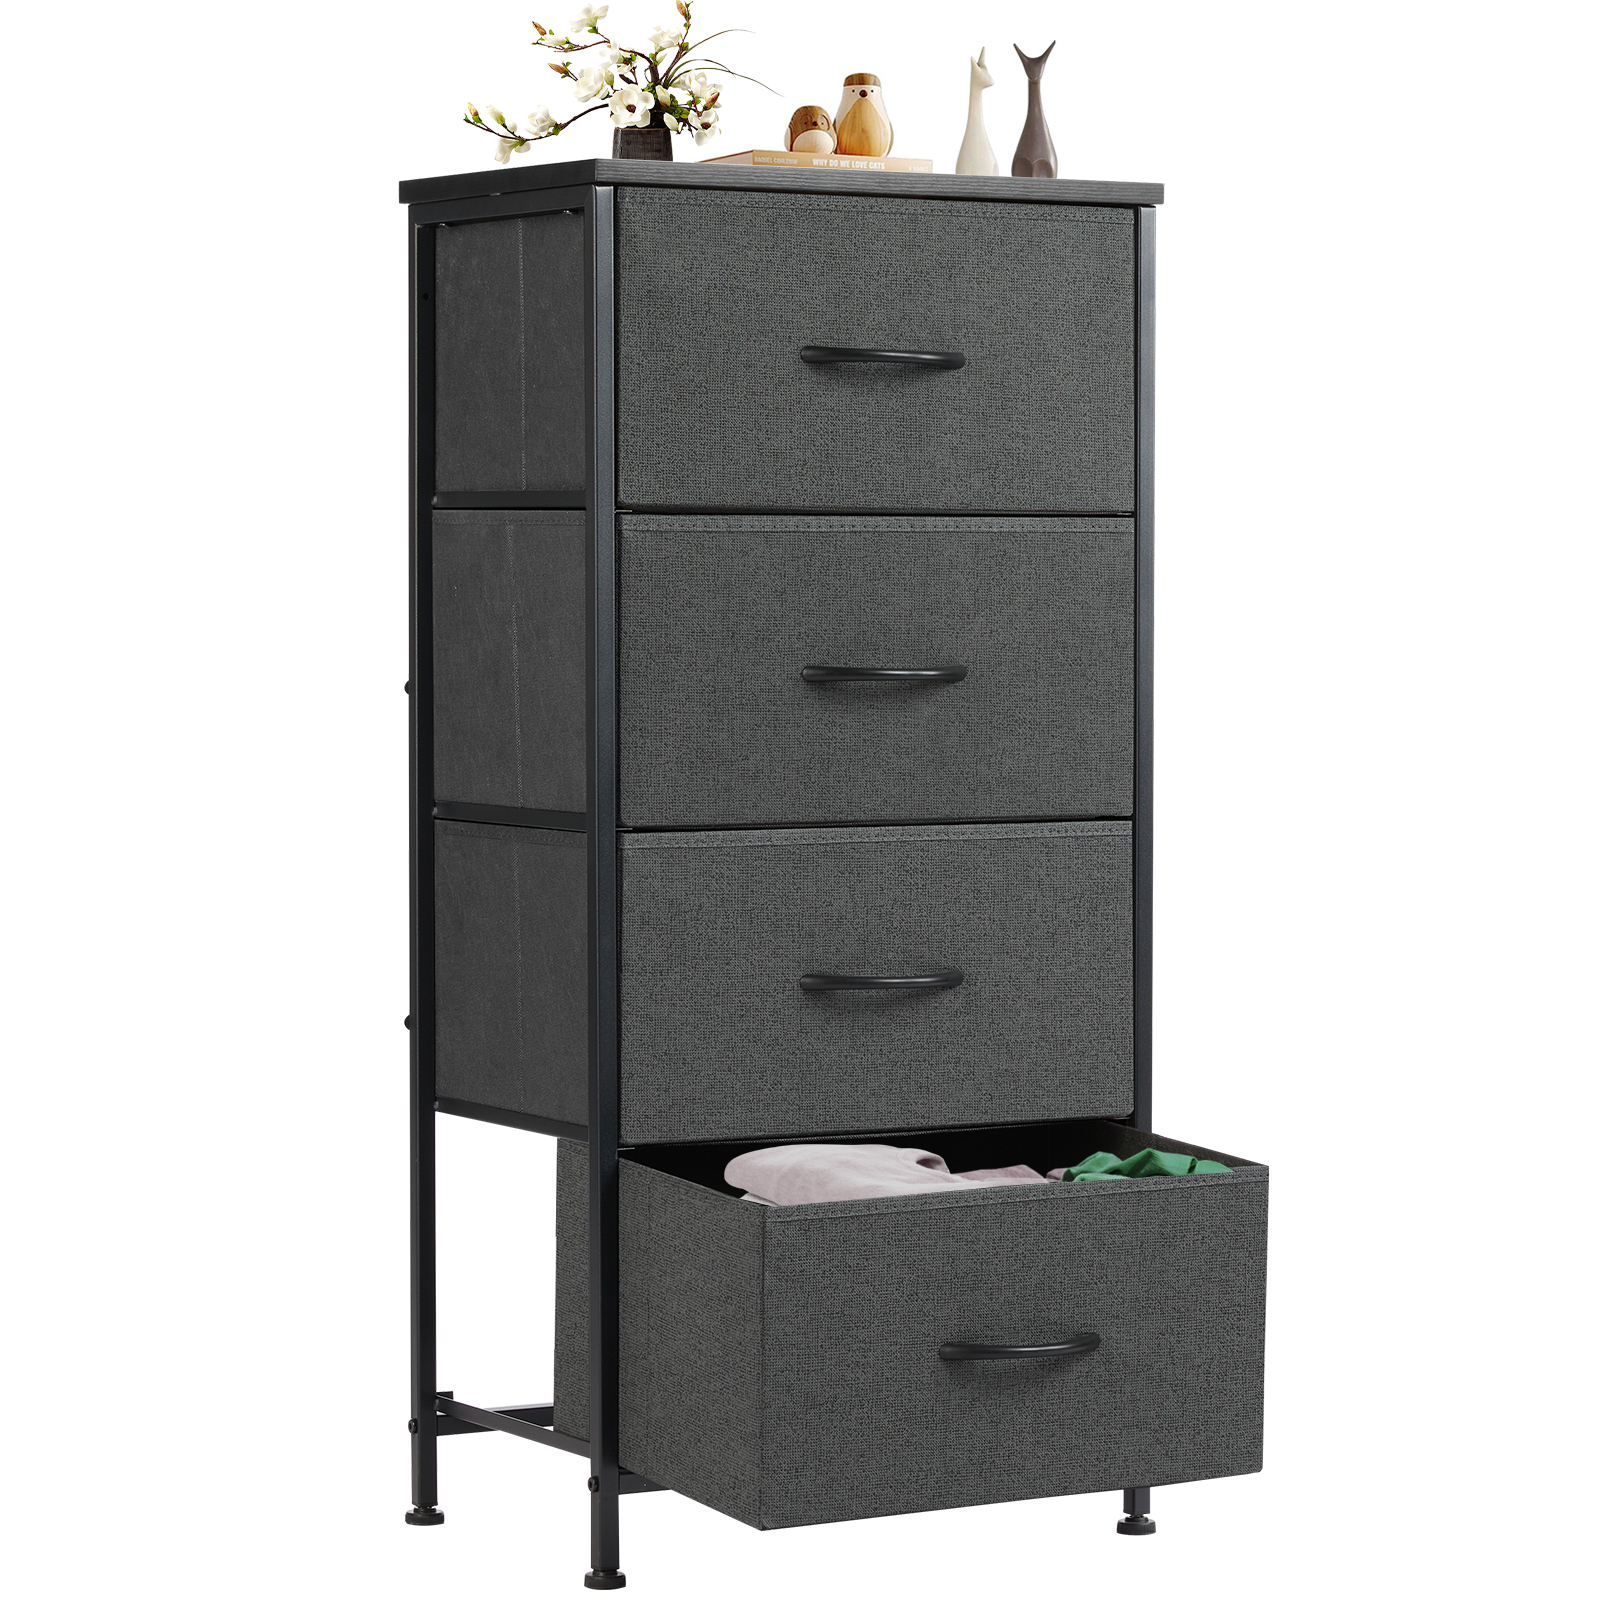 

4 Fabric Drawers Dresser, Storage Chest Organizer Units Bins, Dresser & Chest Of Drawers, Storage Tower With Fabric Cabinet, Metal Frame Portable Furniture For Livingroom, Bedroom, Lab